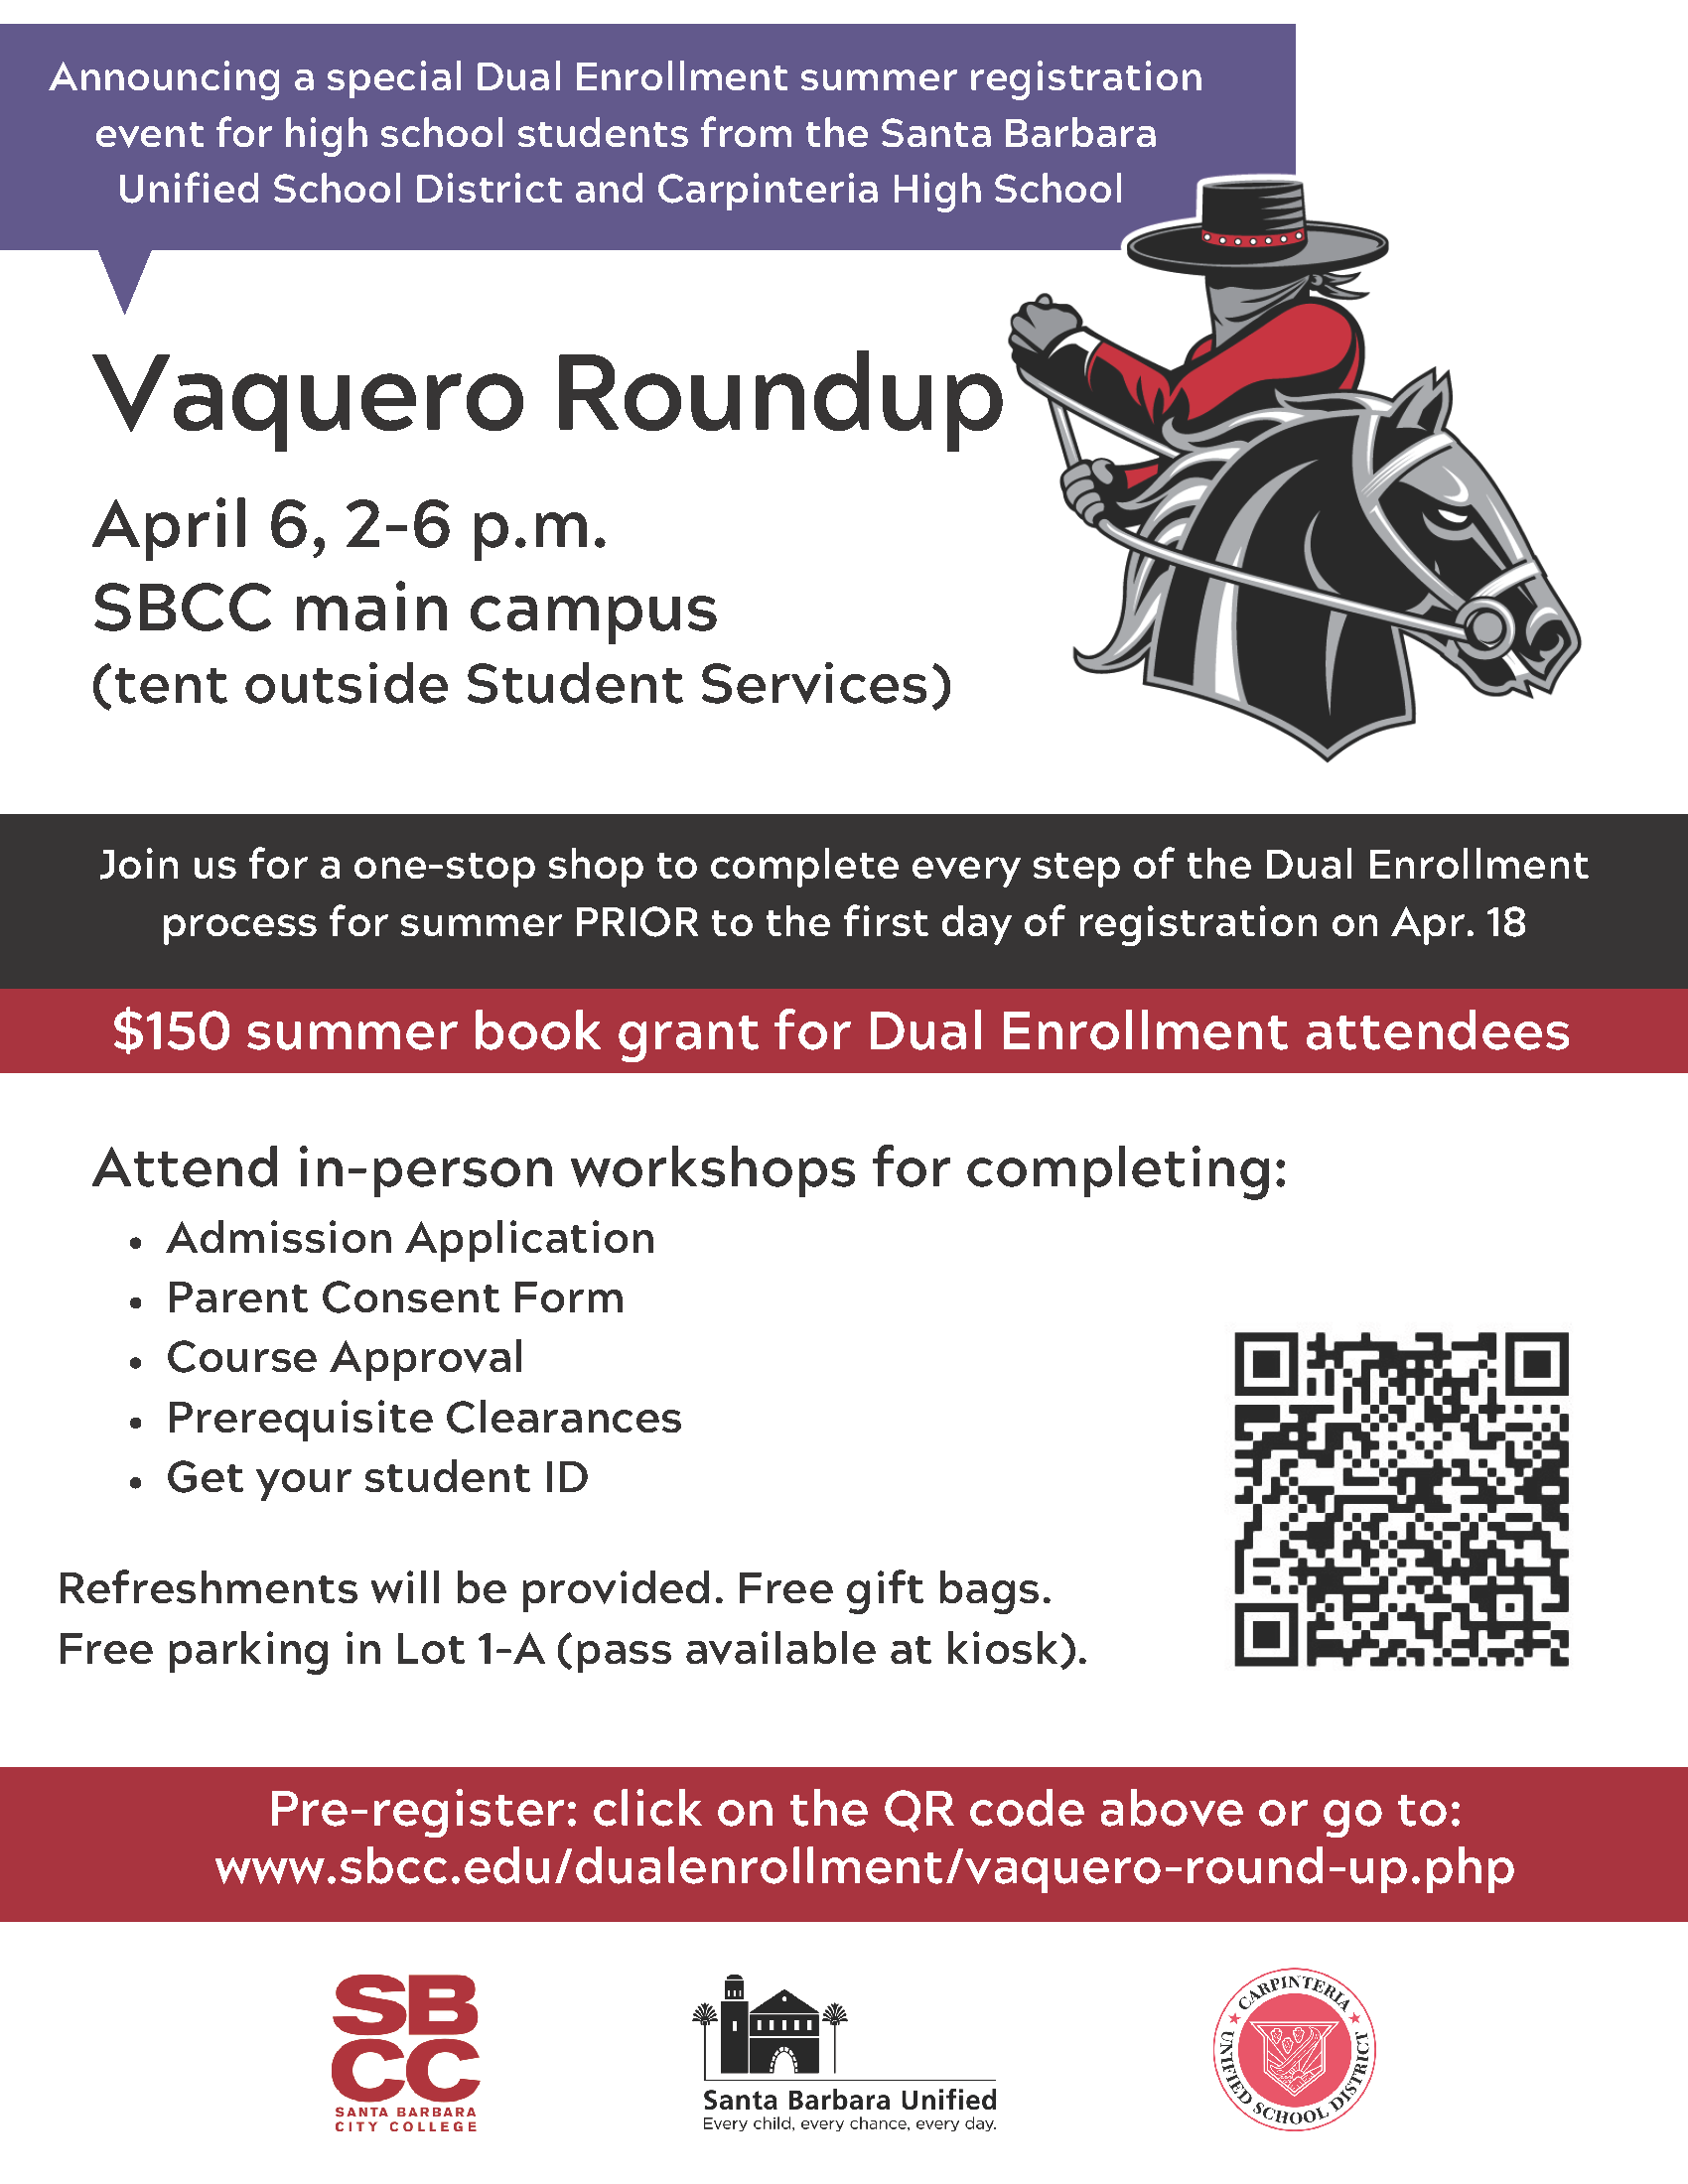 Vaquero Round-Up Date/Time Announcement Flyer